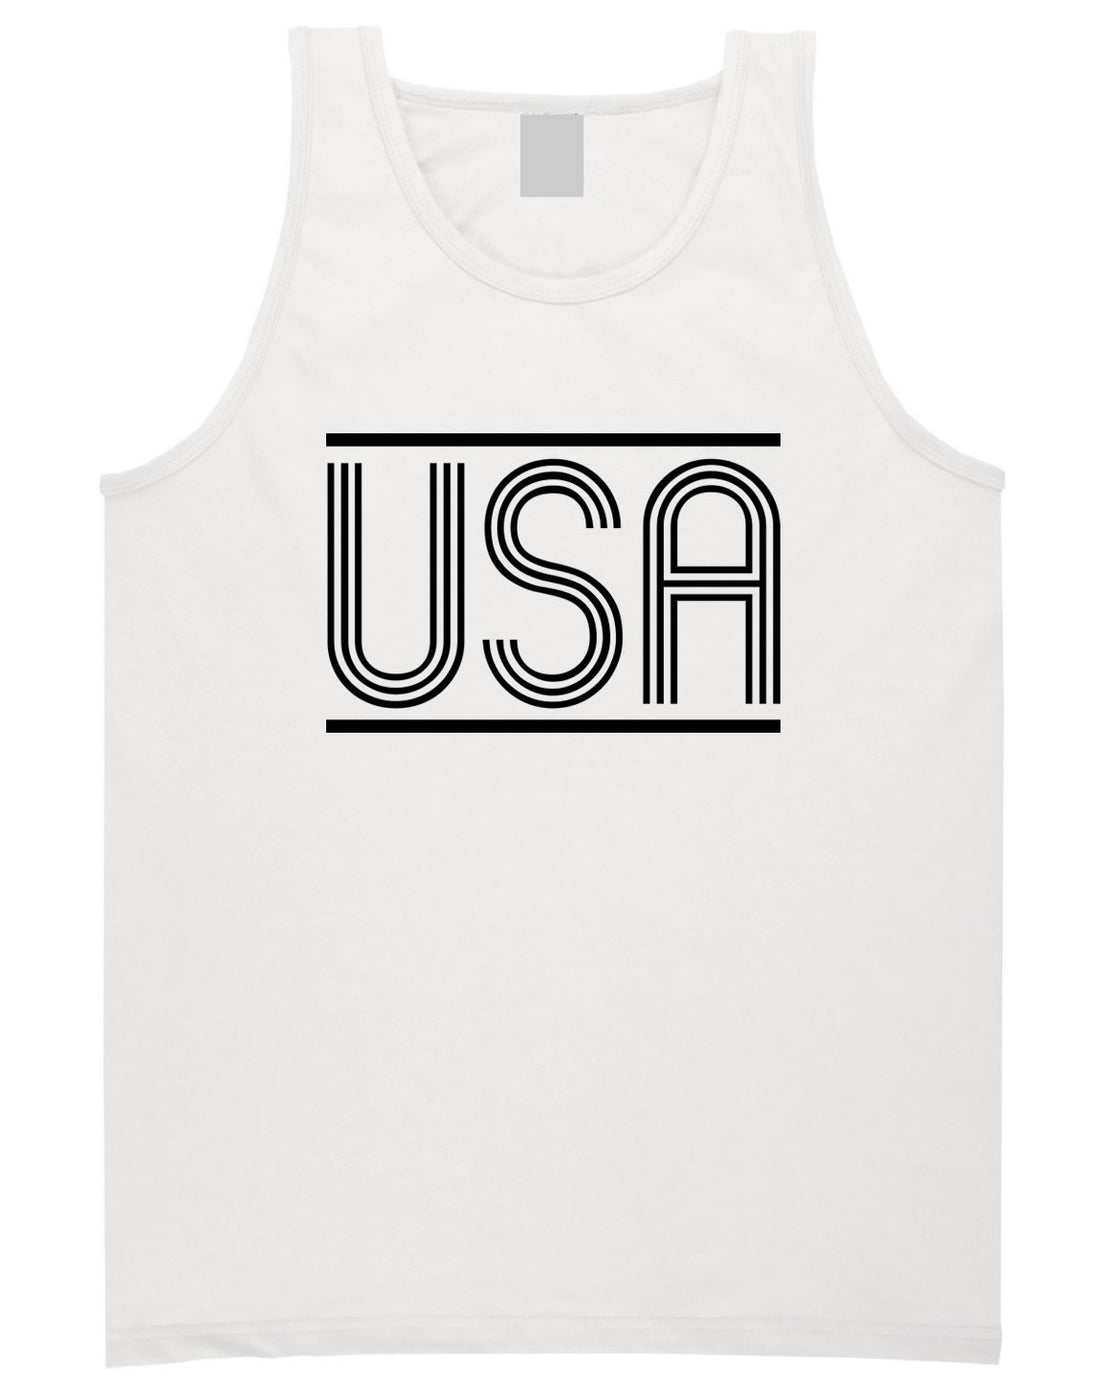 USA America Fall15 Tank Top in White by Kings Of NY